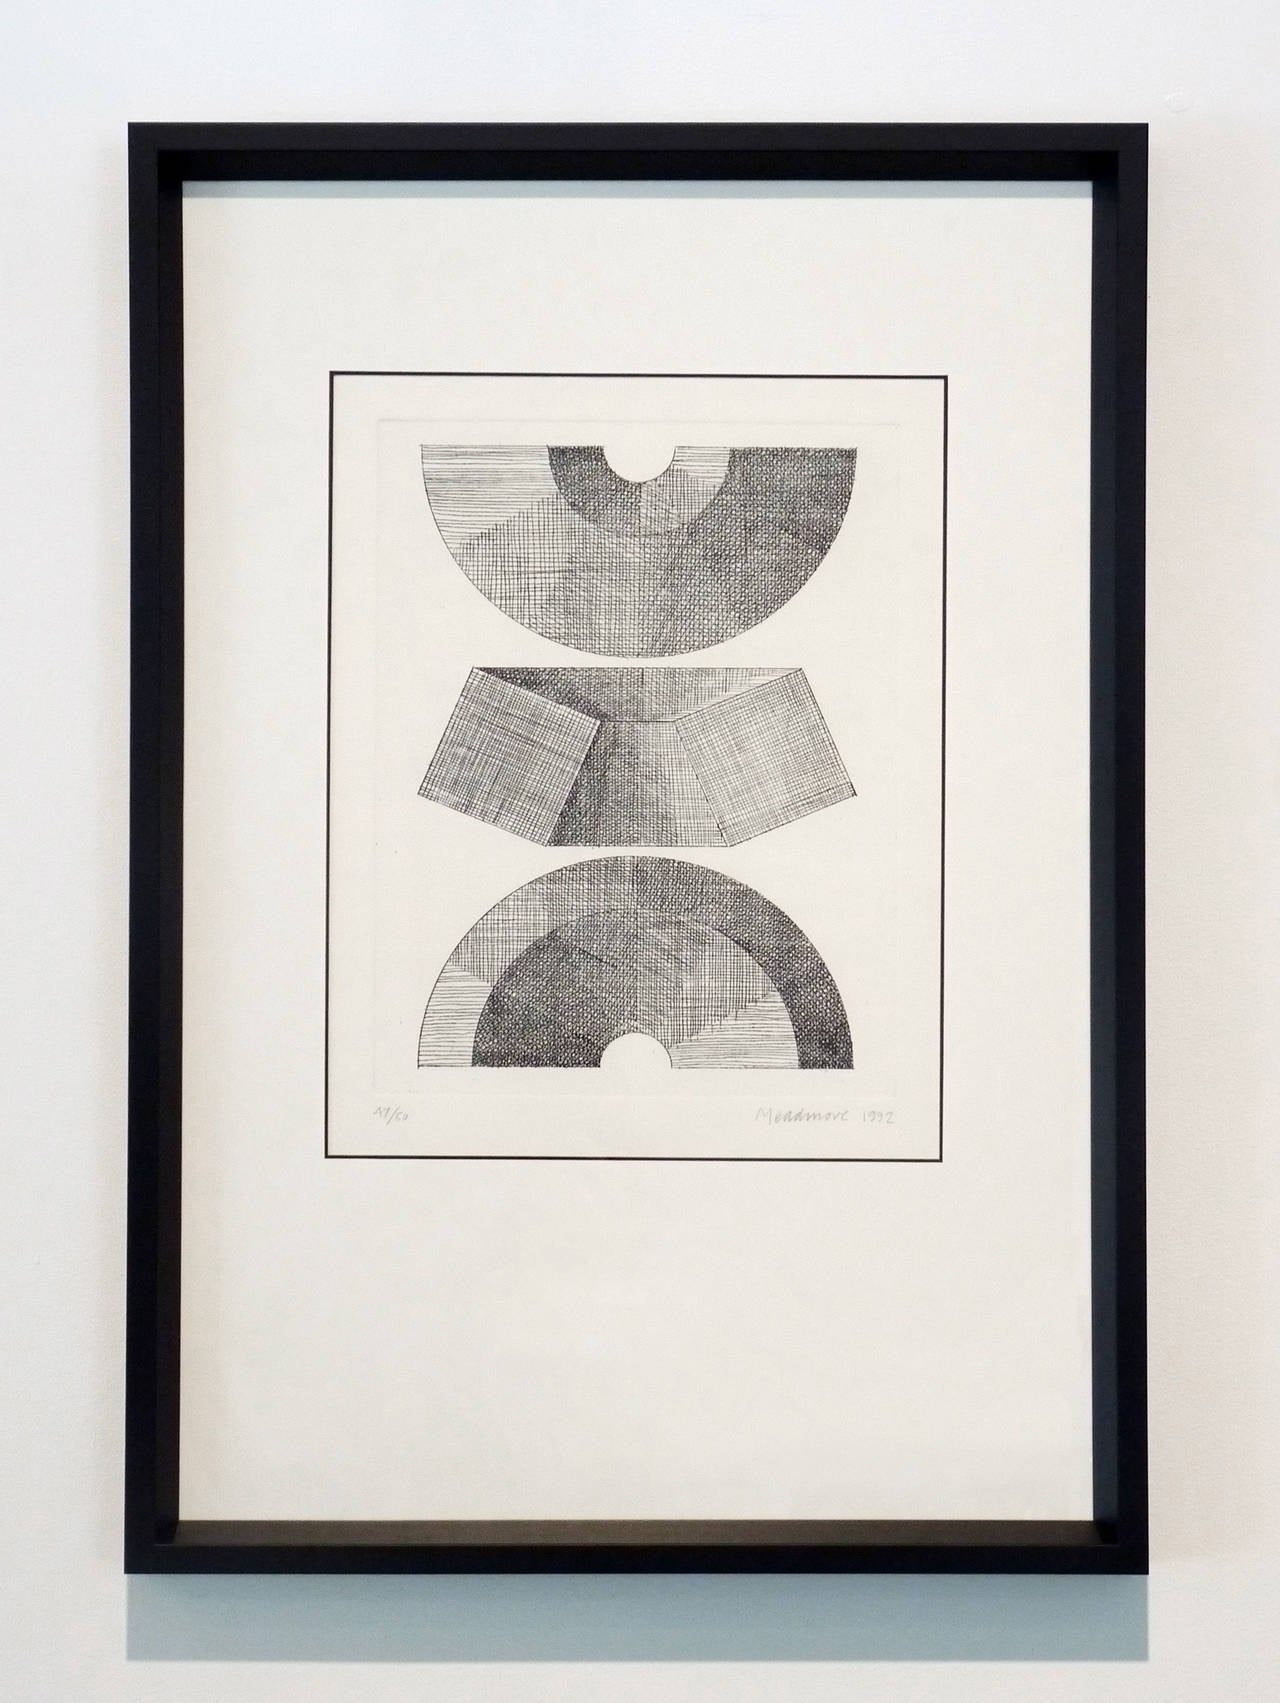 Clement Meadmore Abstract Print - Three Views of Half Circle Module